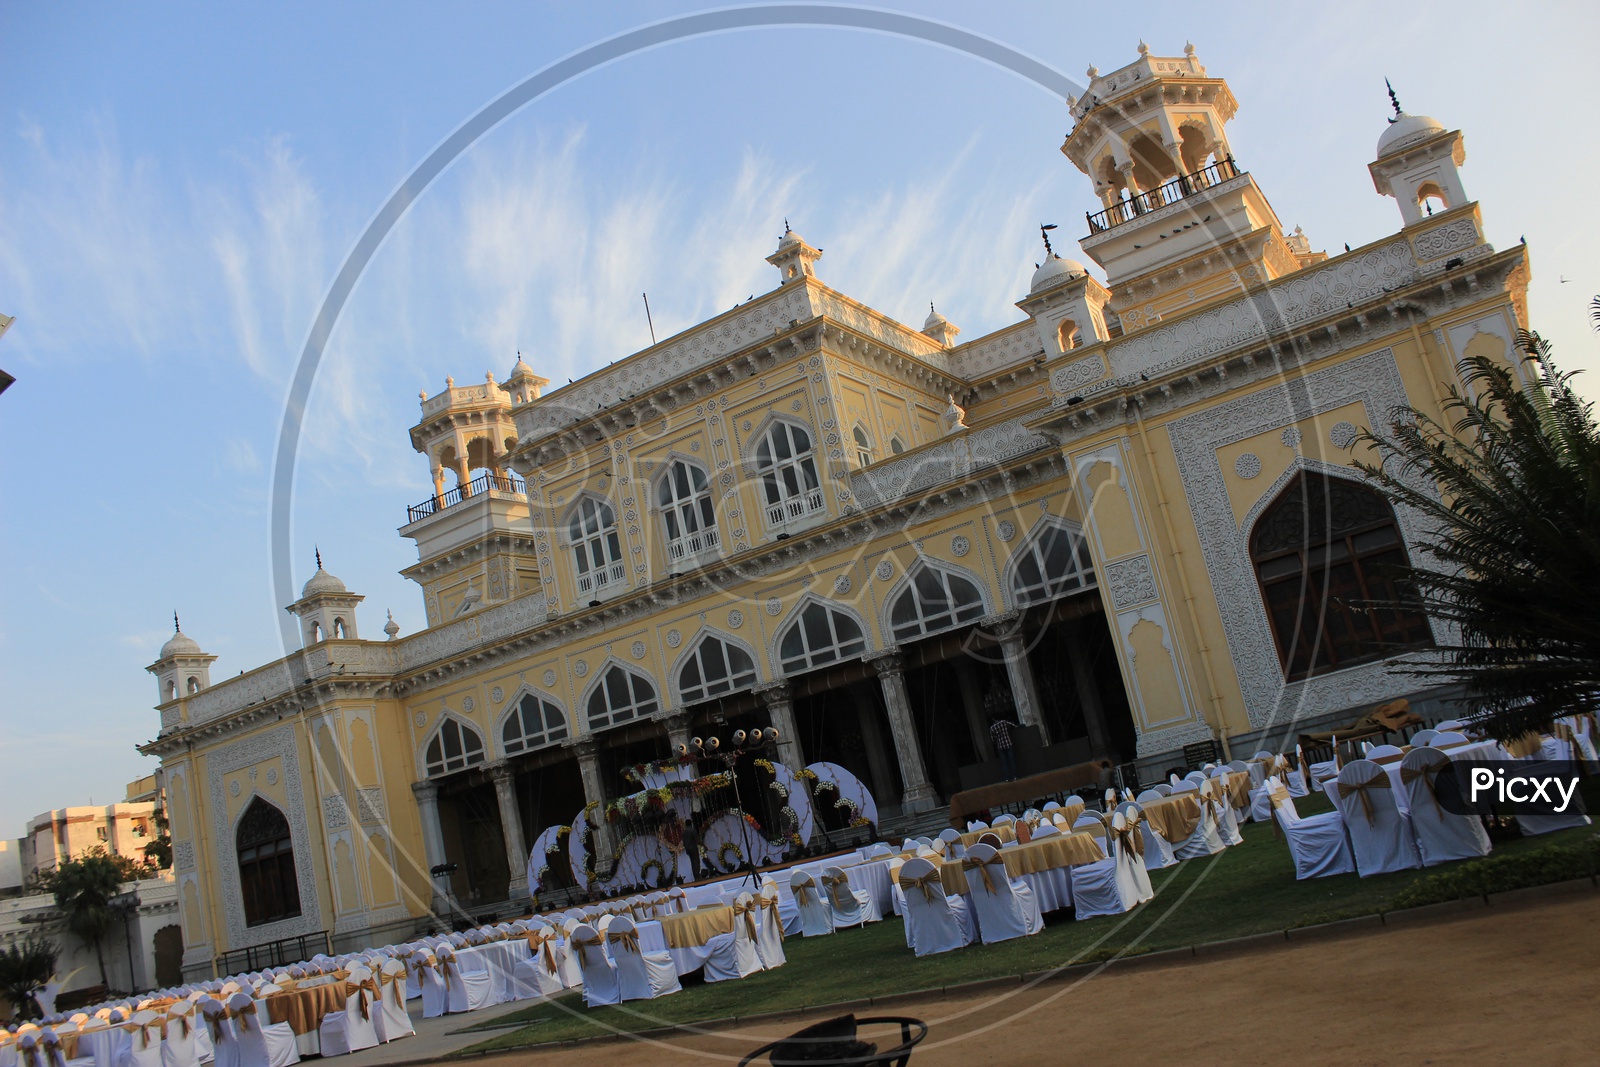 Chowmahalla Palace Architectural View With Blue Sky Background